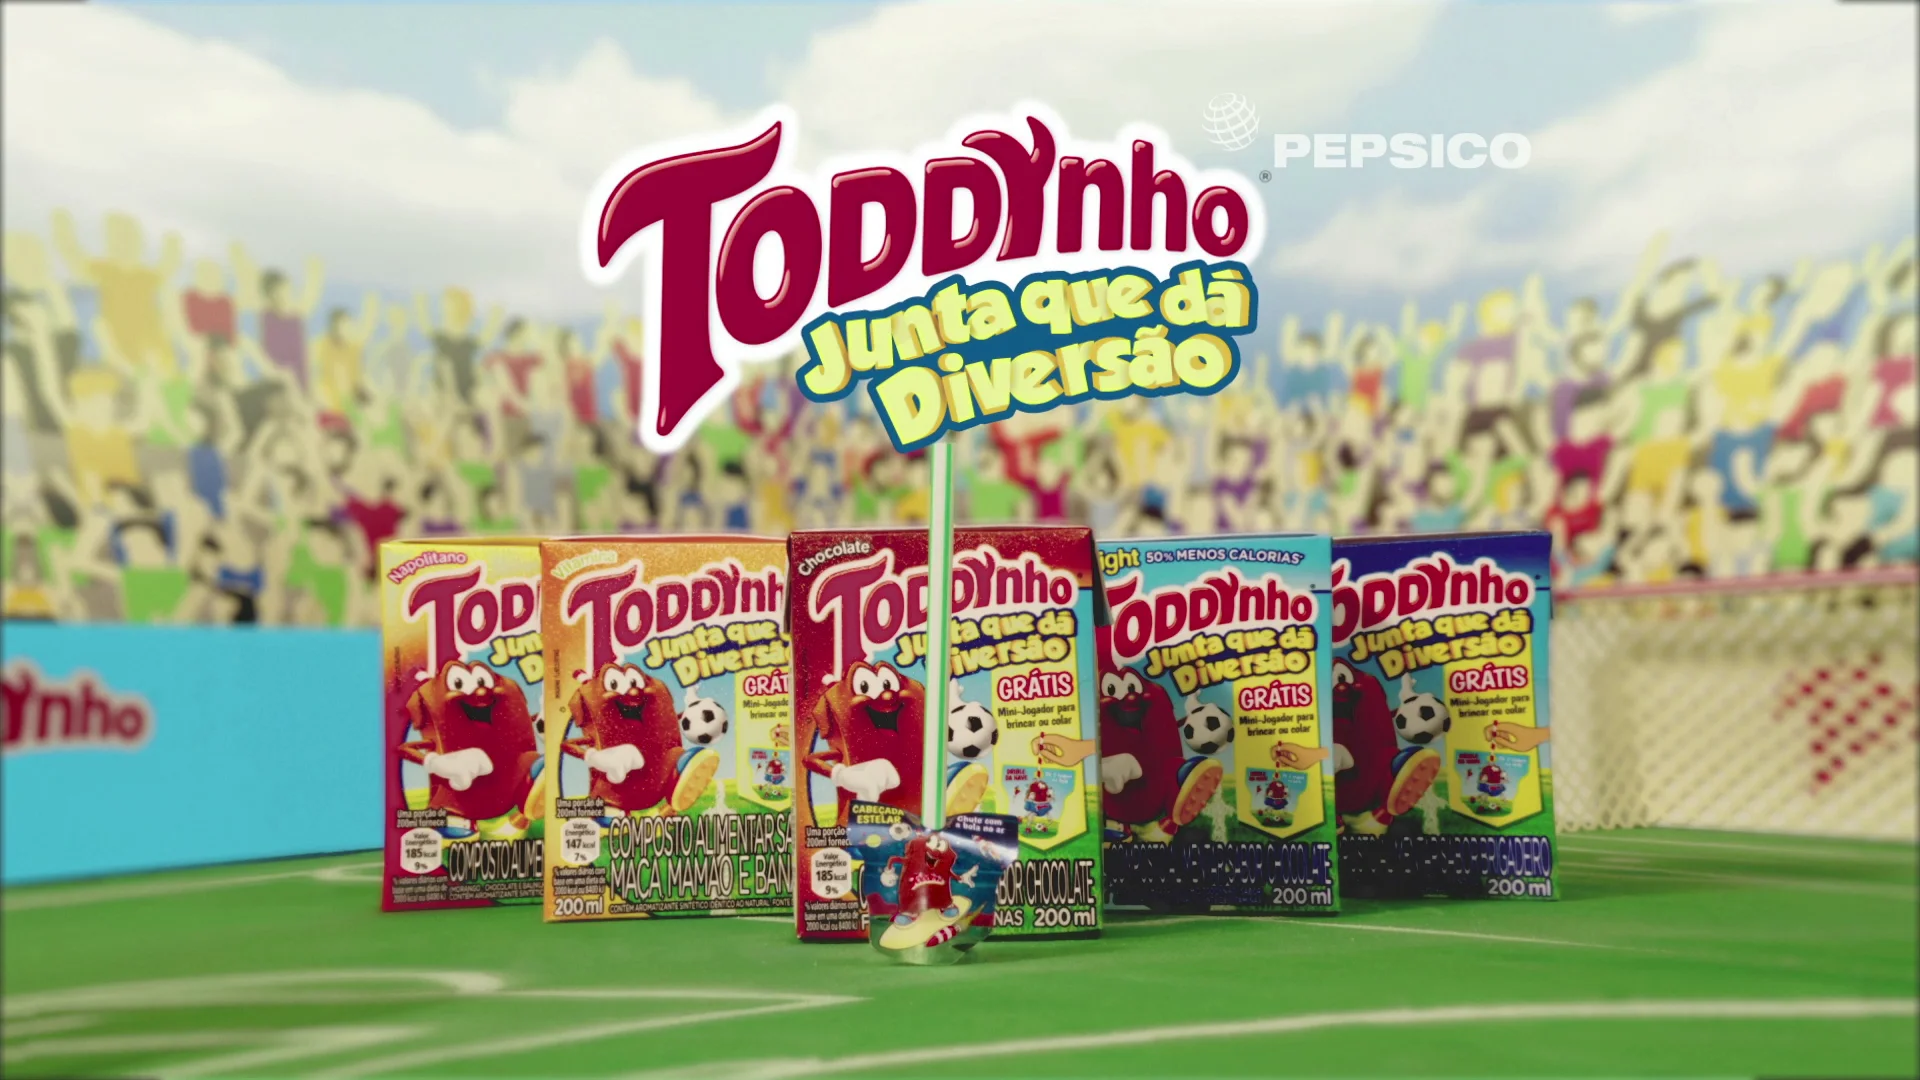 Toddynho (Commercial) on Vimeo